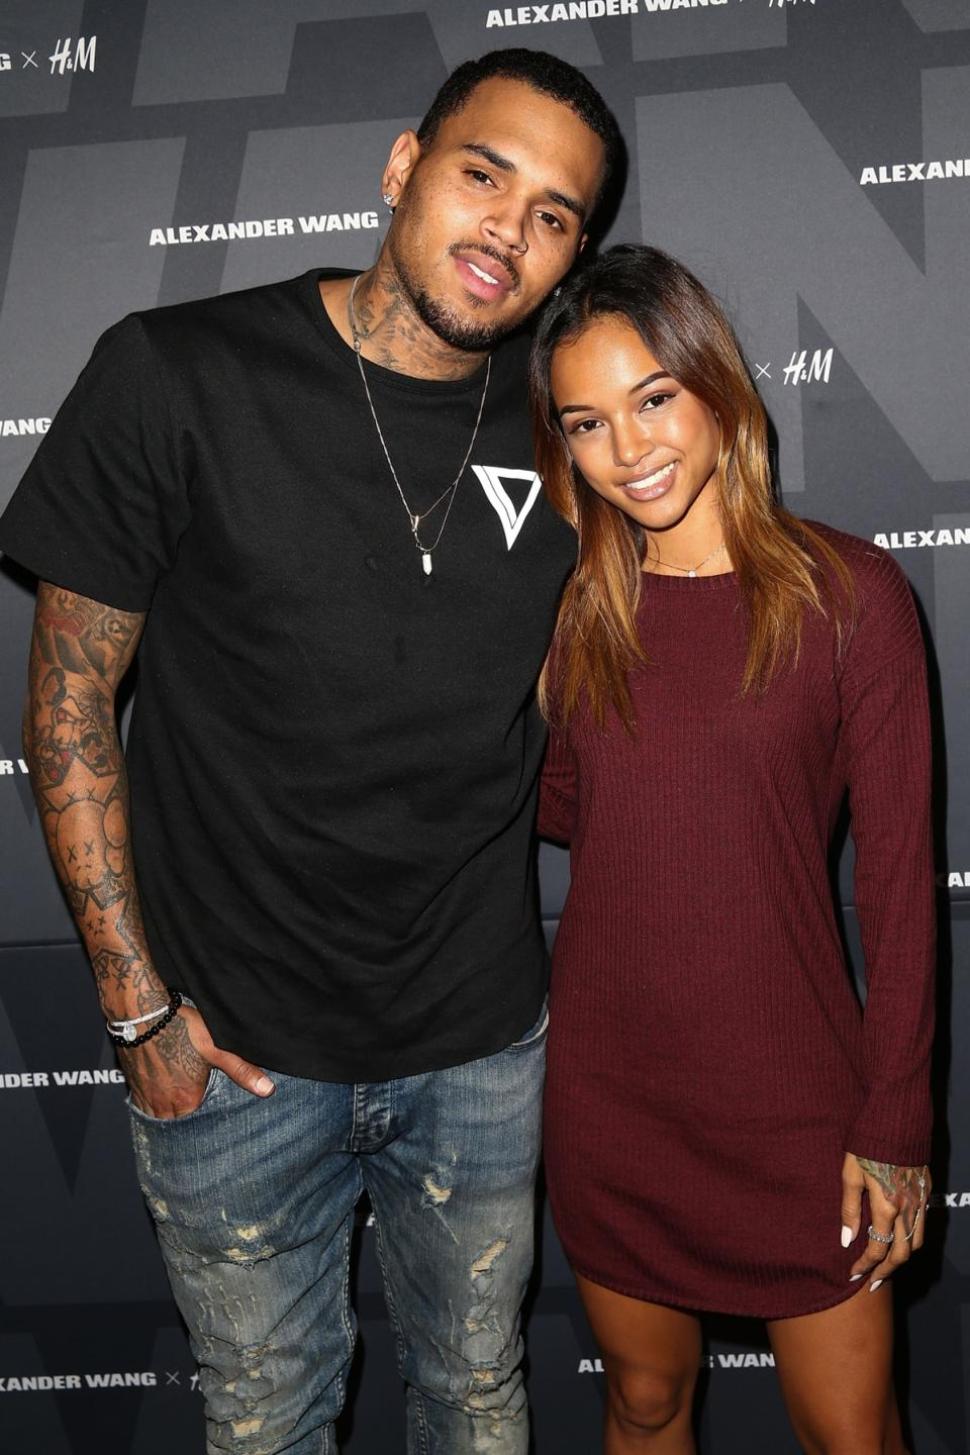 The 'Run It' singer appeared in Los Angeles County Superior court with on-again girlfriend Karrueche Tran. The two are pictured here at a West Hollywood event in November.